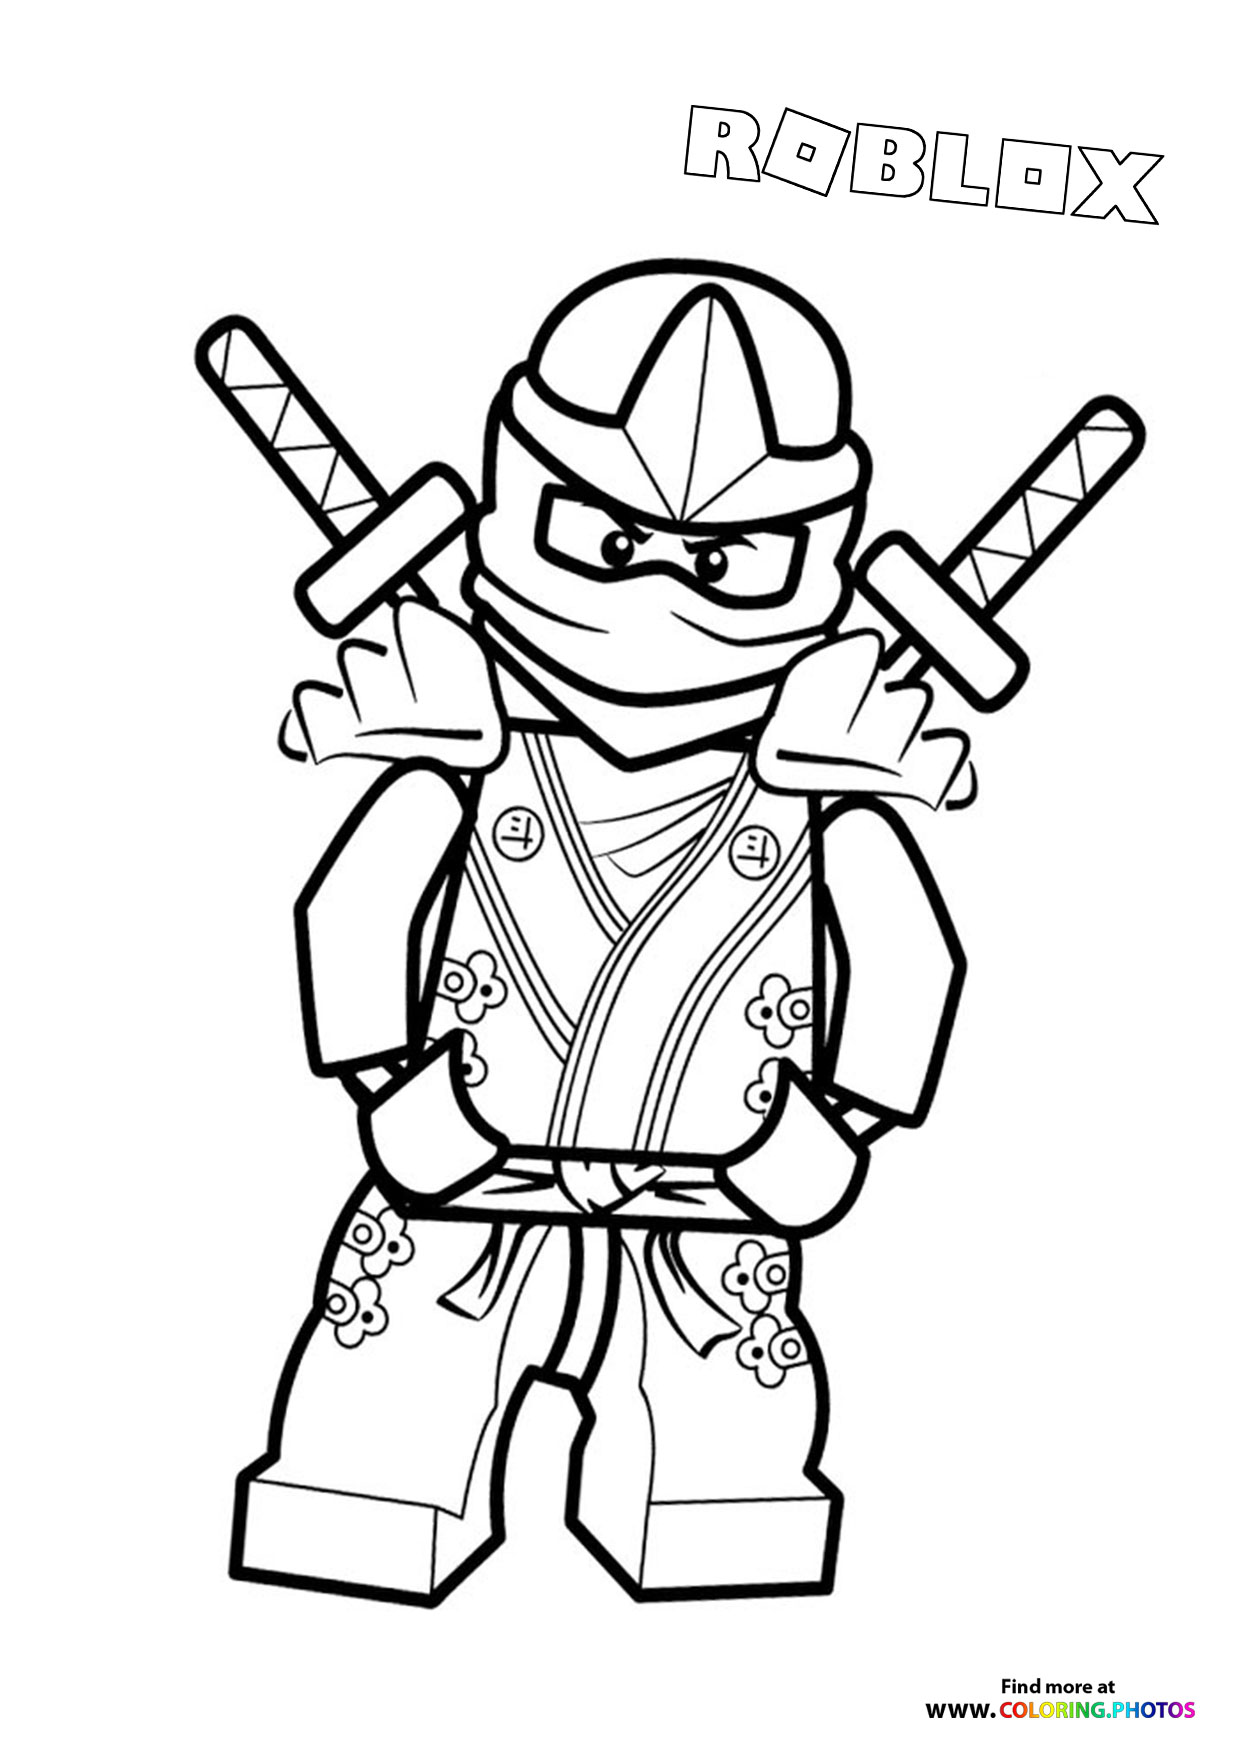 Ninja character   Coloring Pages for kids